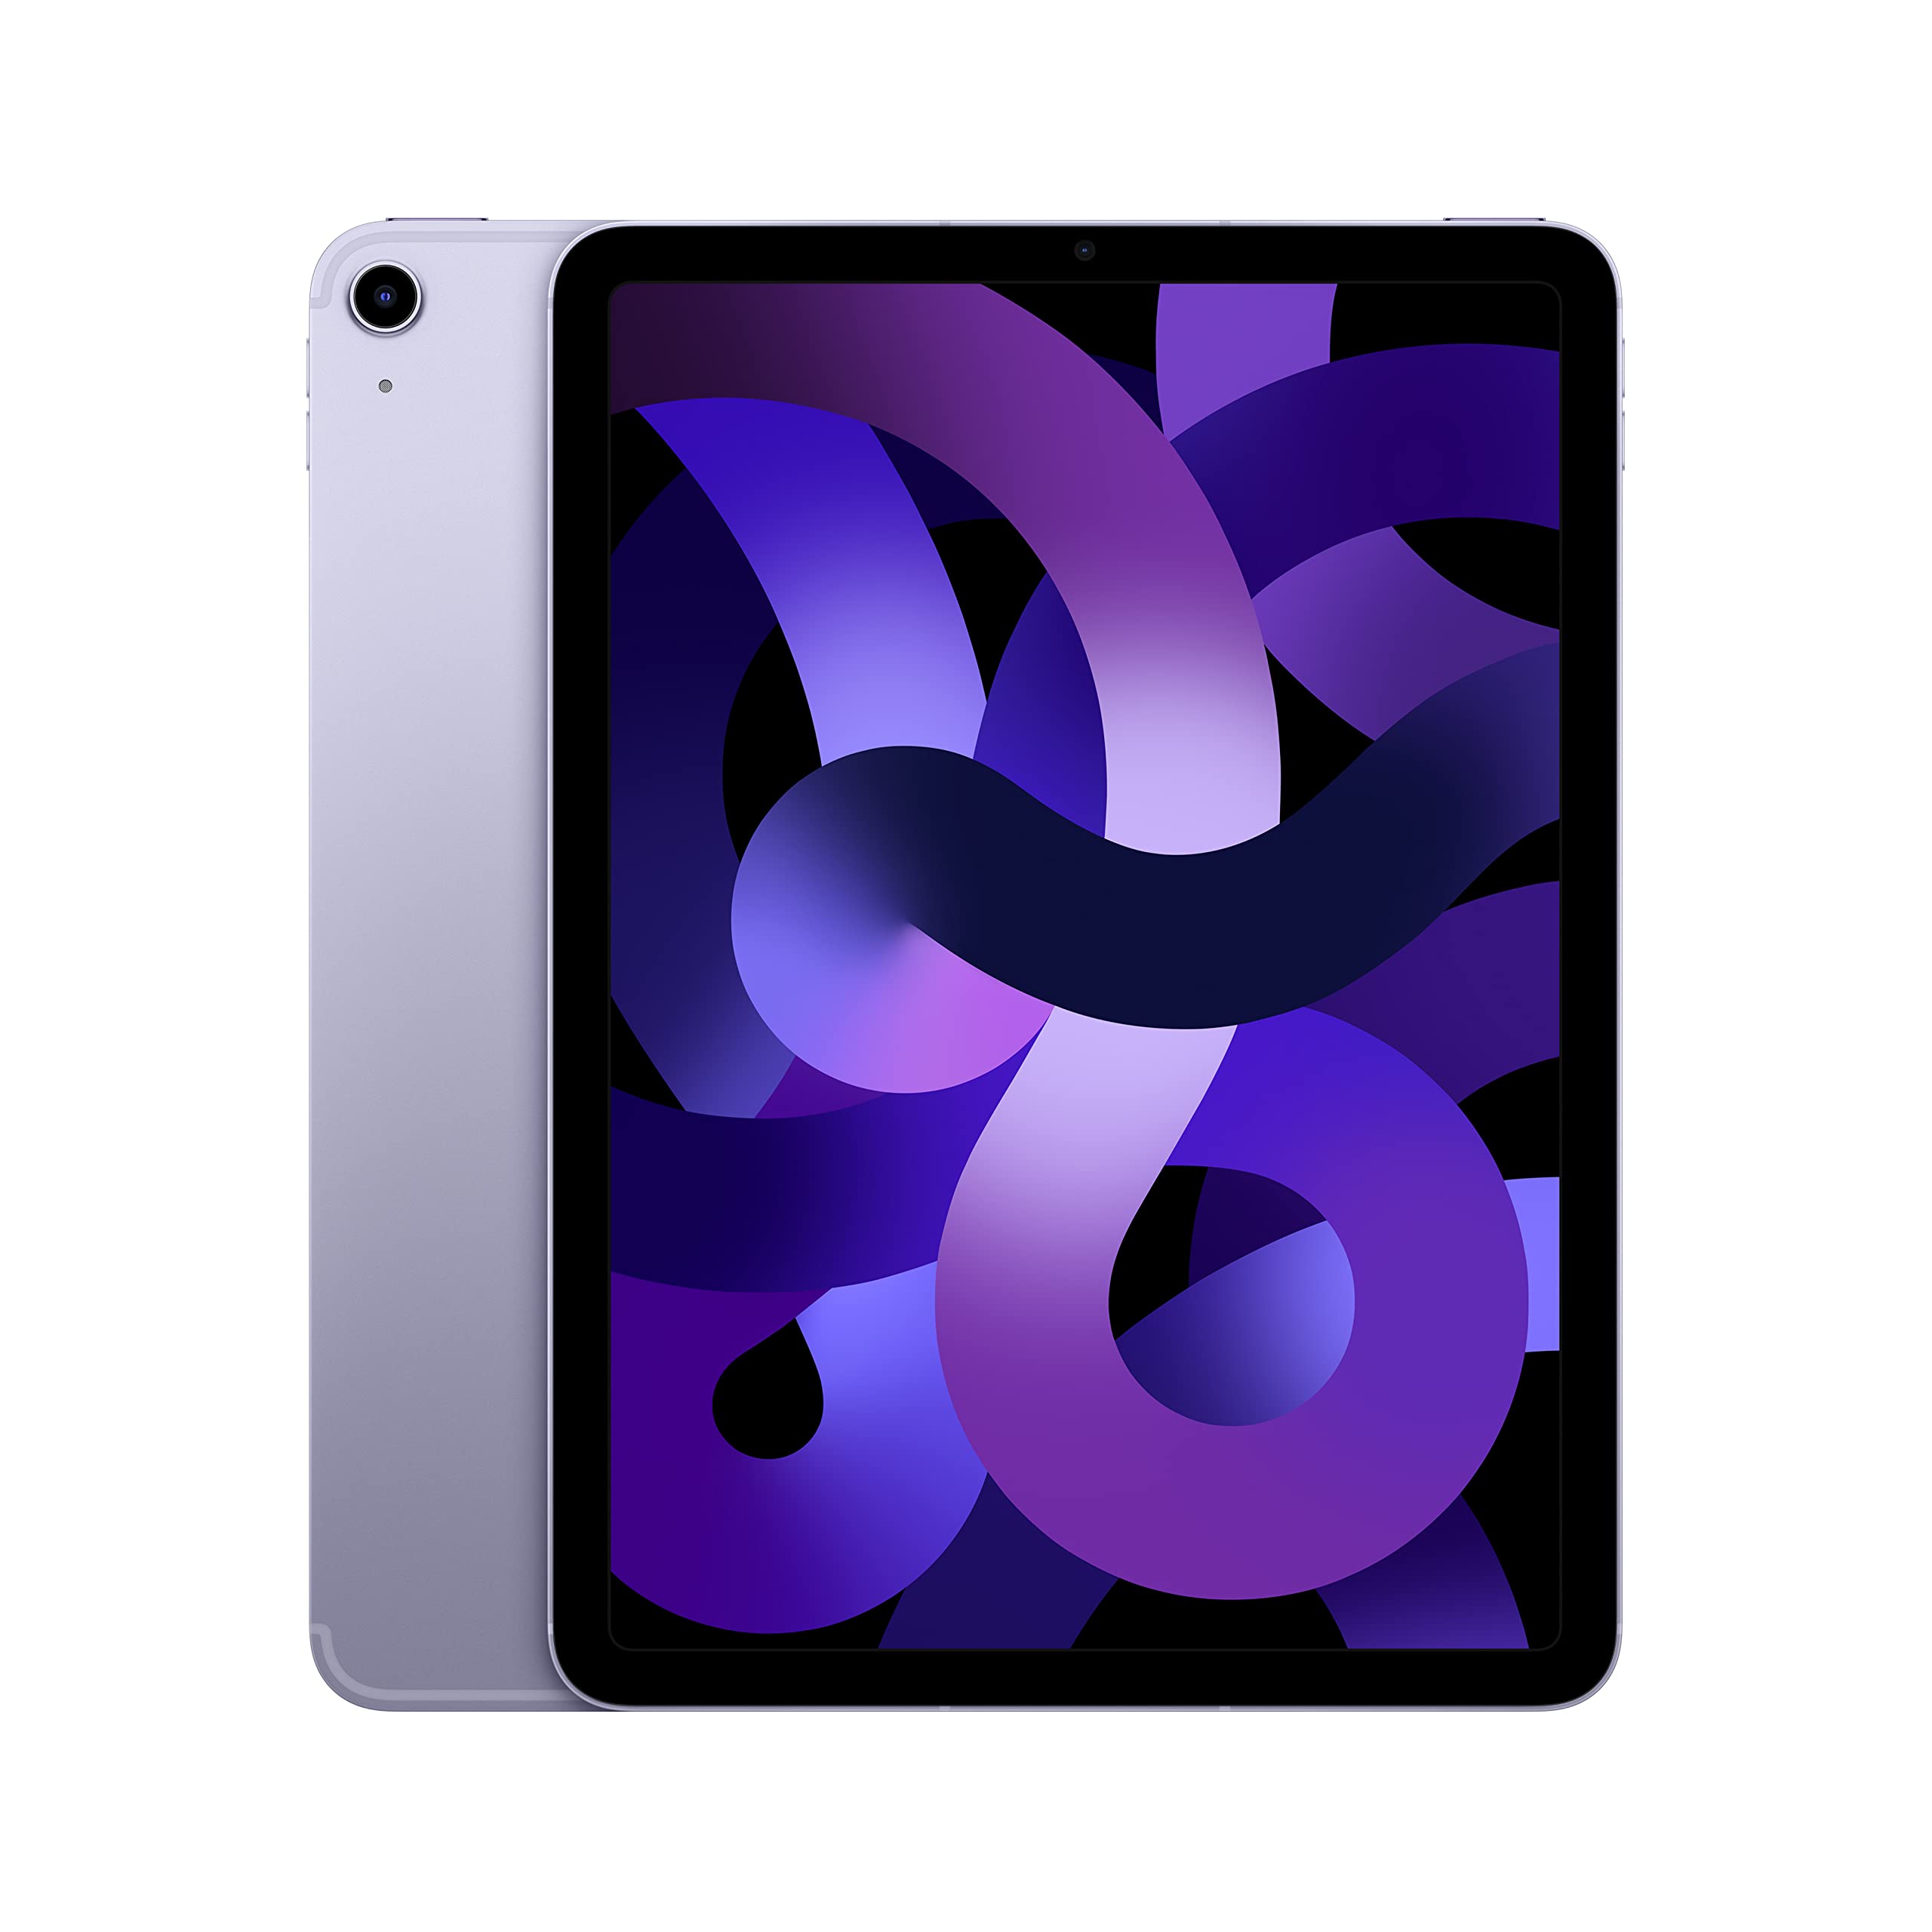 Apple iPad Air (5th Generation): with M1 chip, 10.9-inch Liquid Retina Display, 256GB, Wi-Fi 6 + 5G Cellular, 12MP front/12MP Back Camera, Touch ID, All-Day Battery Life - Purple